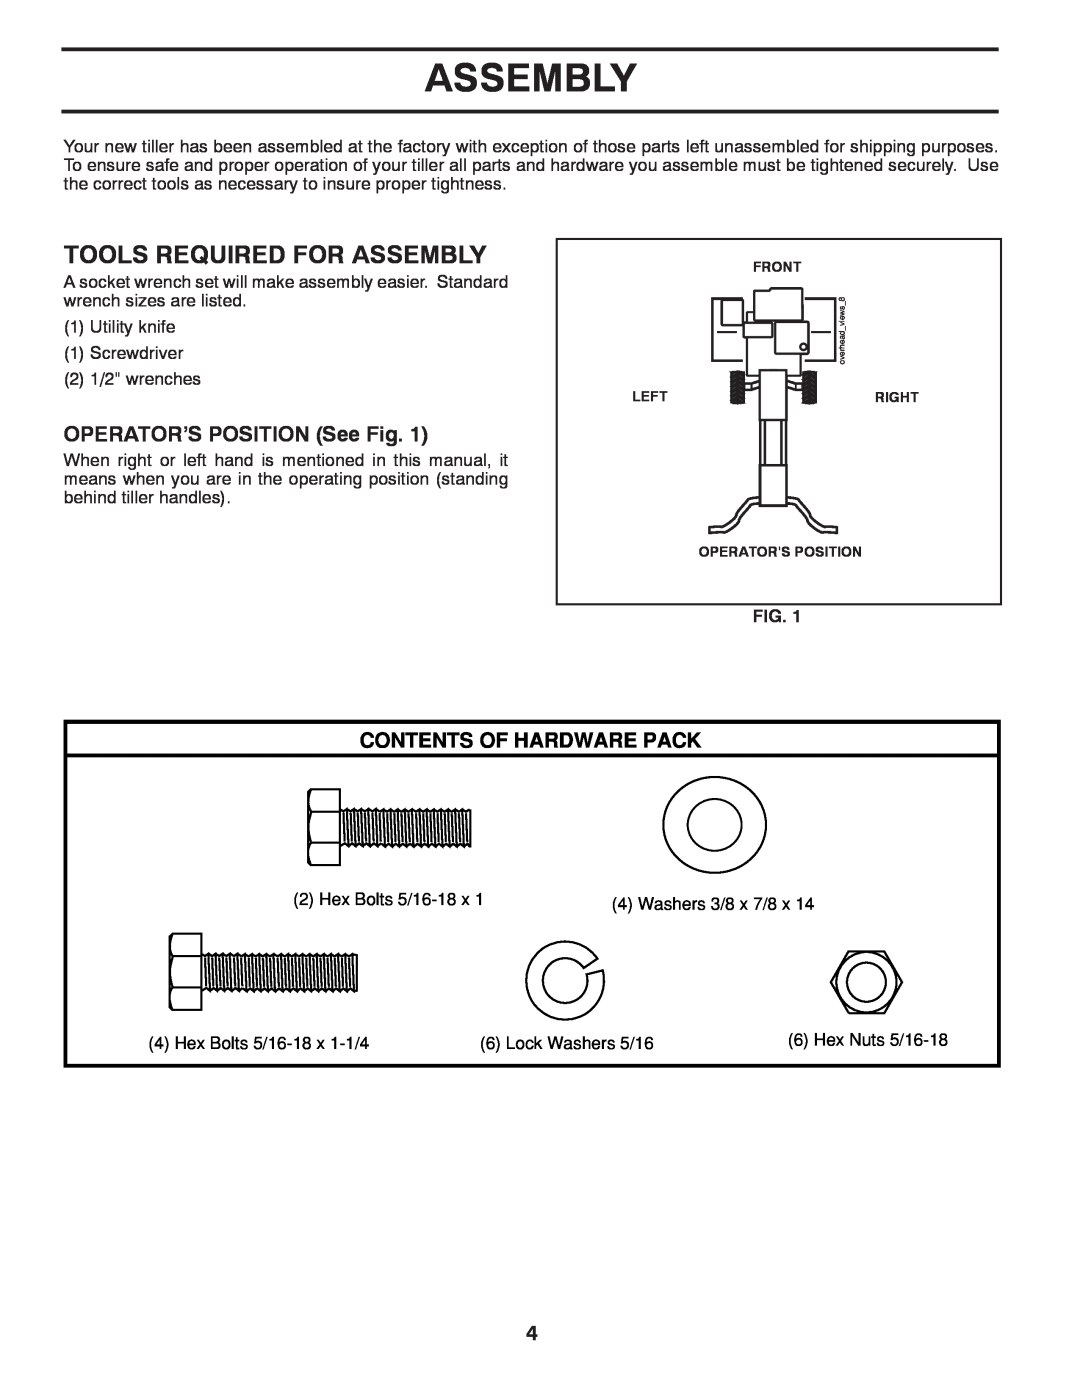 Poulan HDF825X manual Tools Required For Assembly, OPERATOR’S POSITION See Fig, Contents Of Hardware Pack 